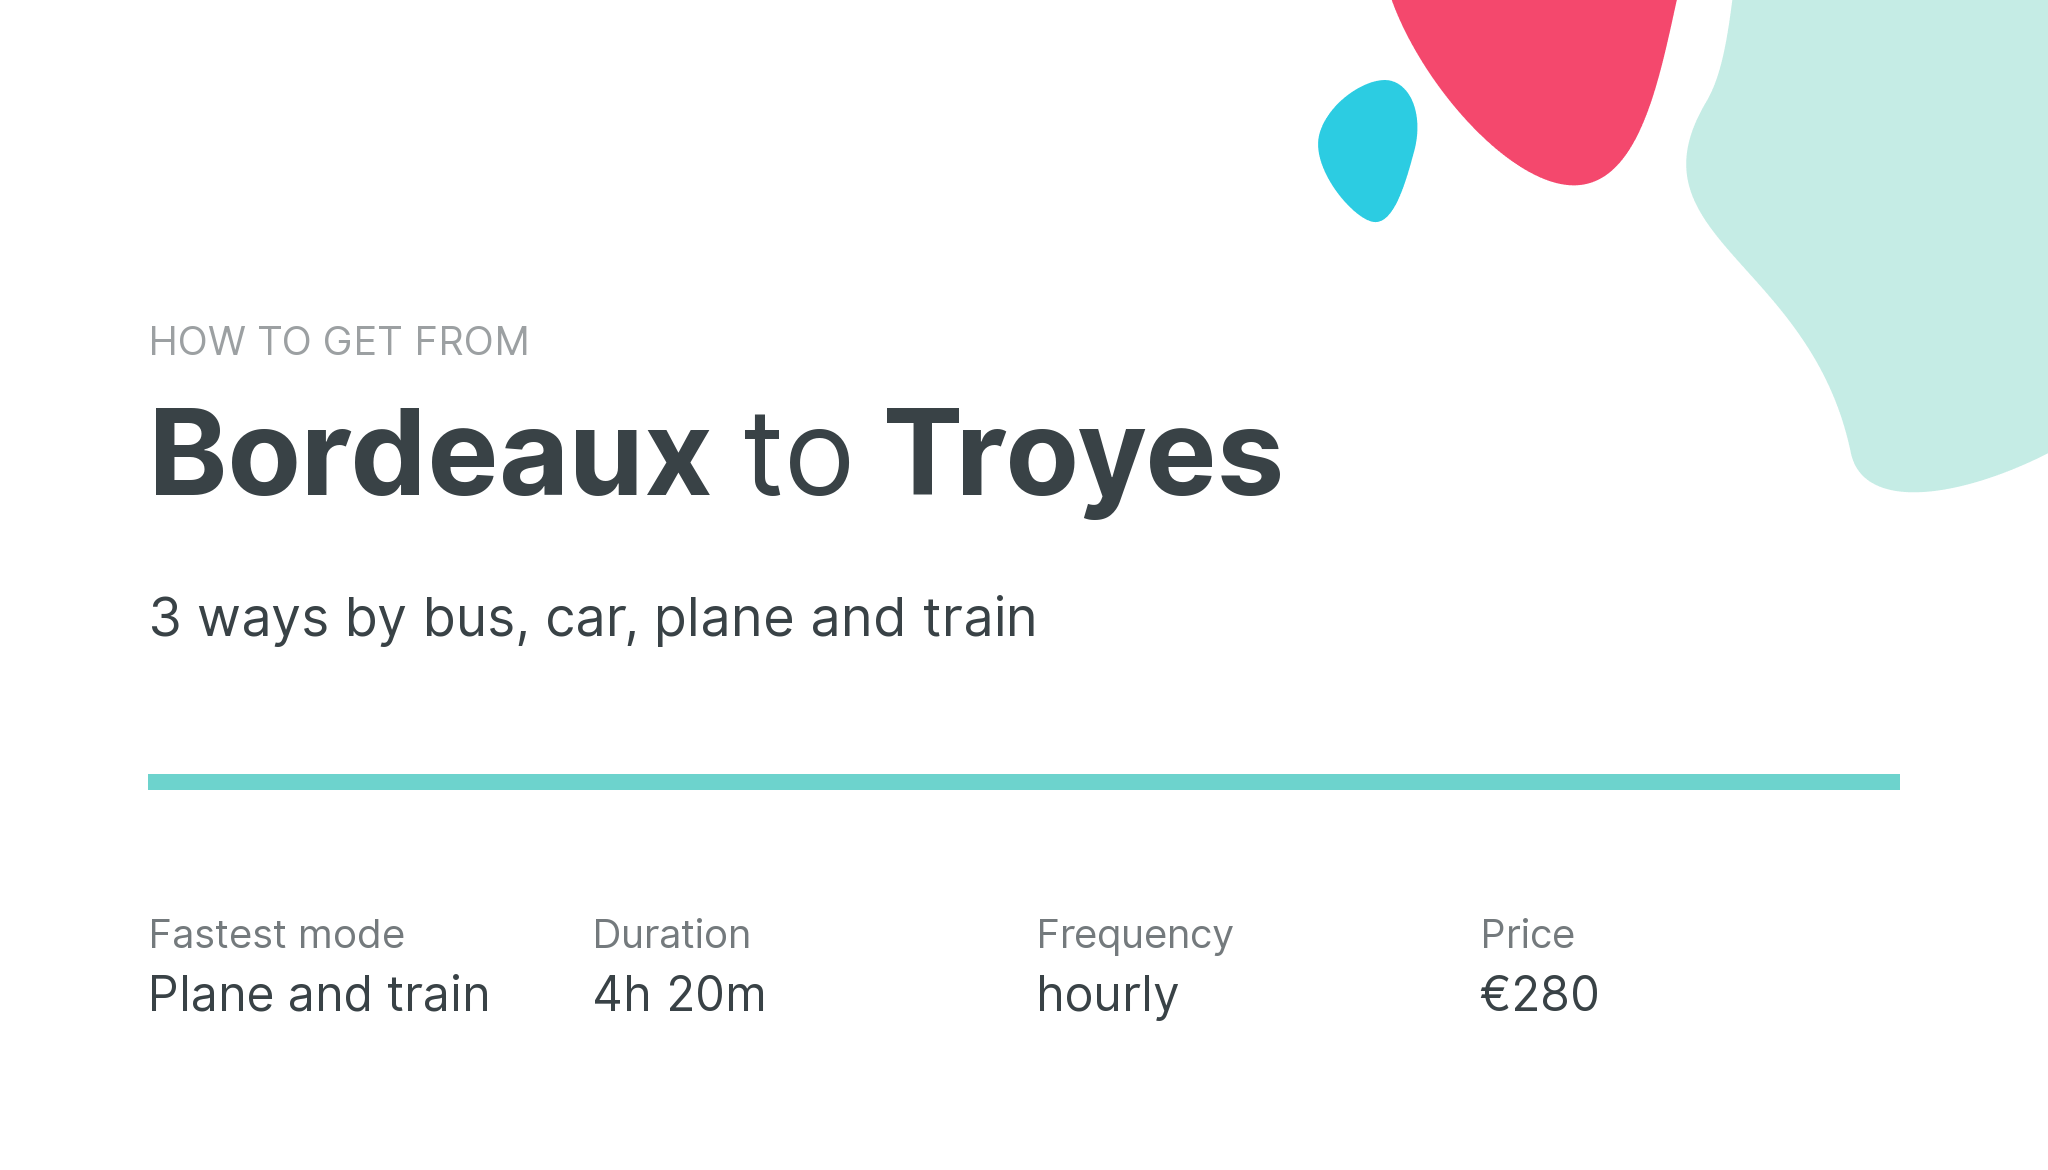 How do I get from Bordeaux to Troyes